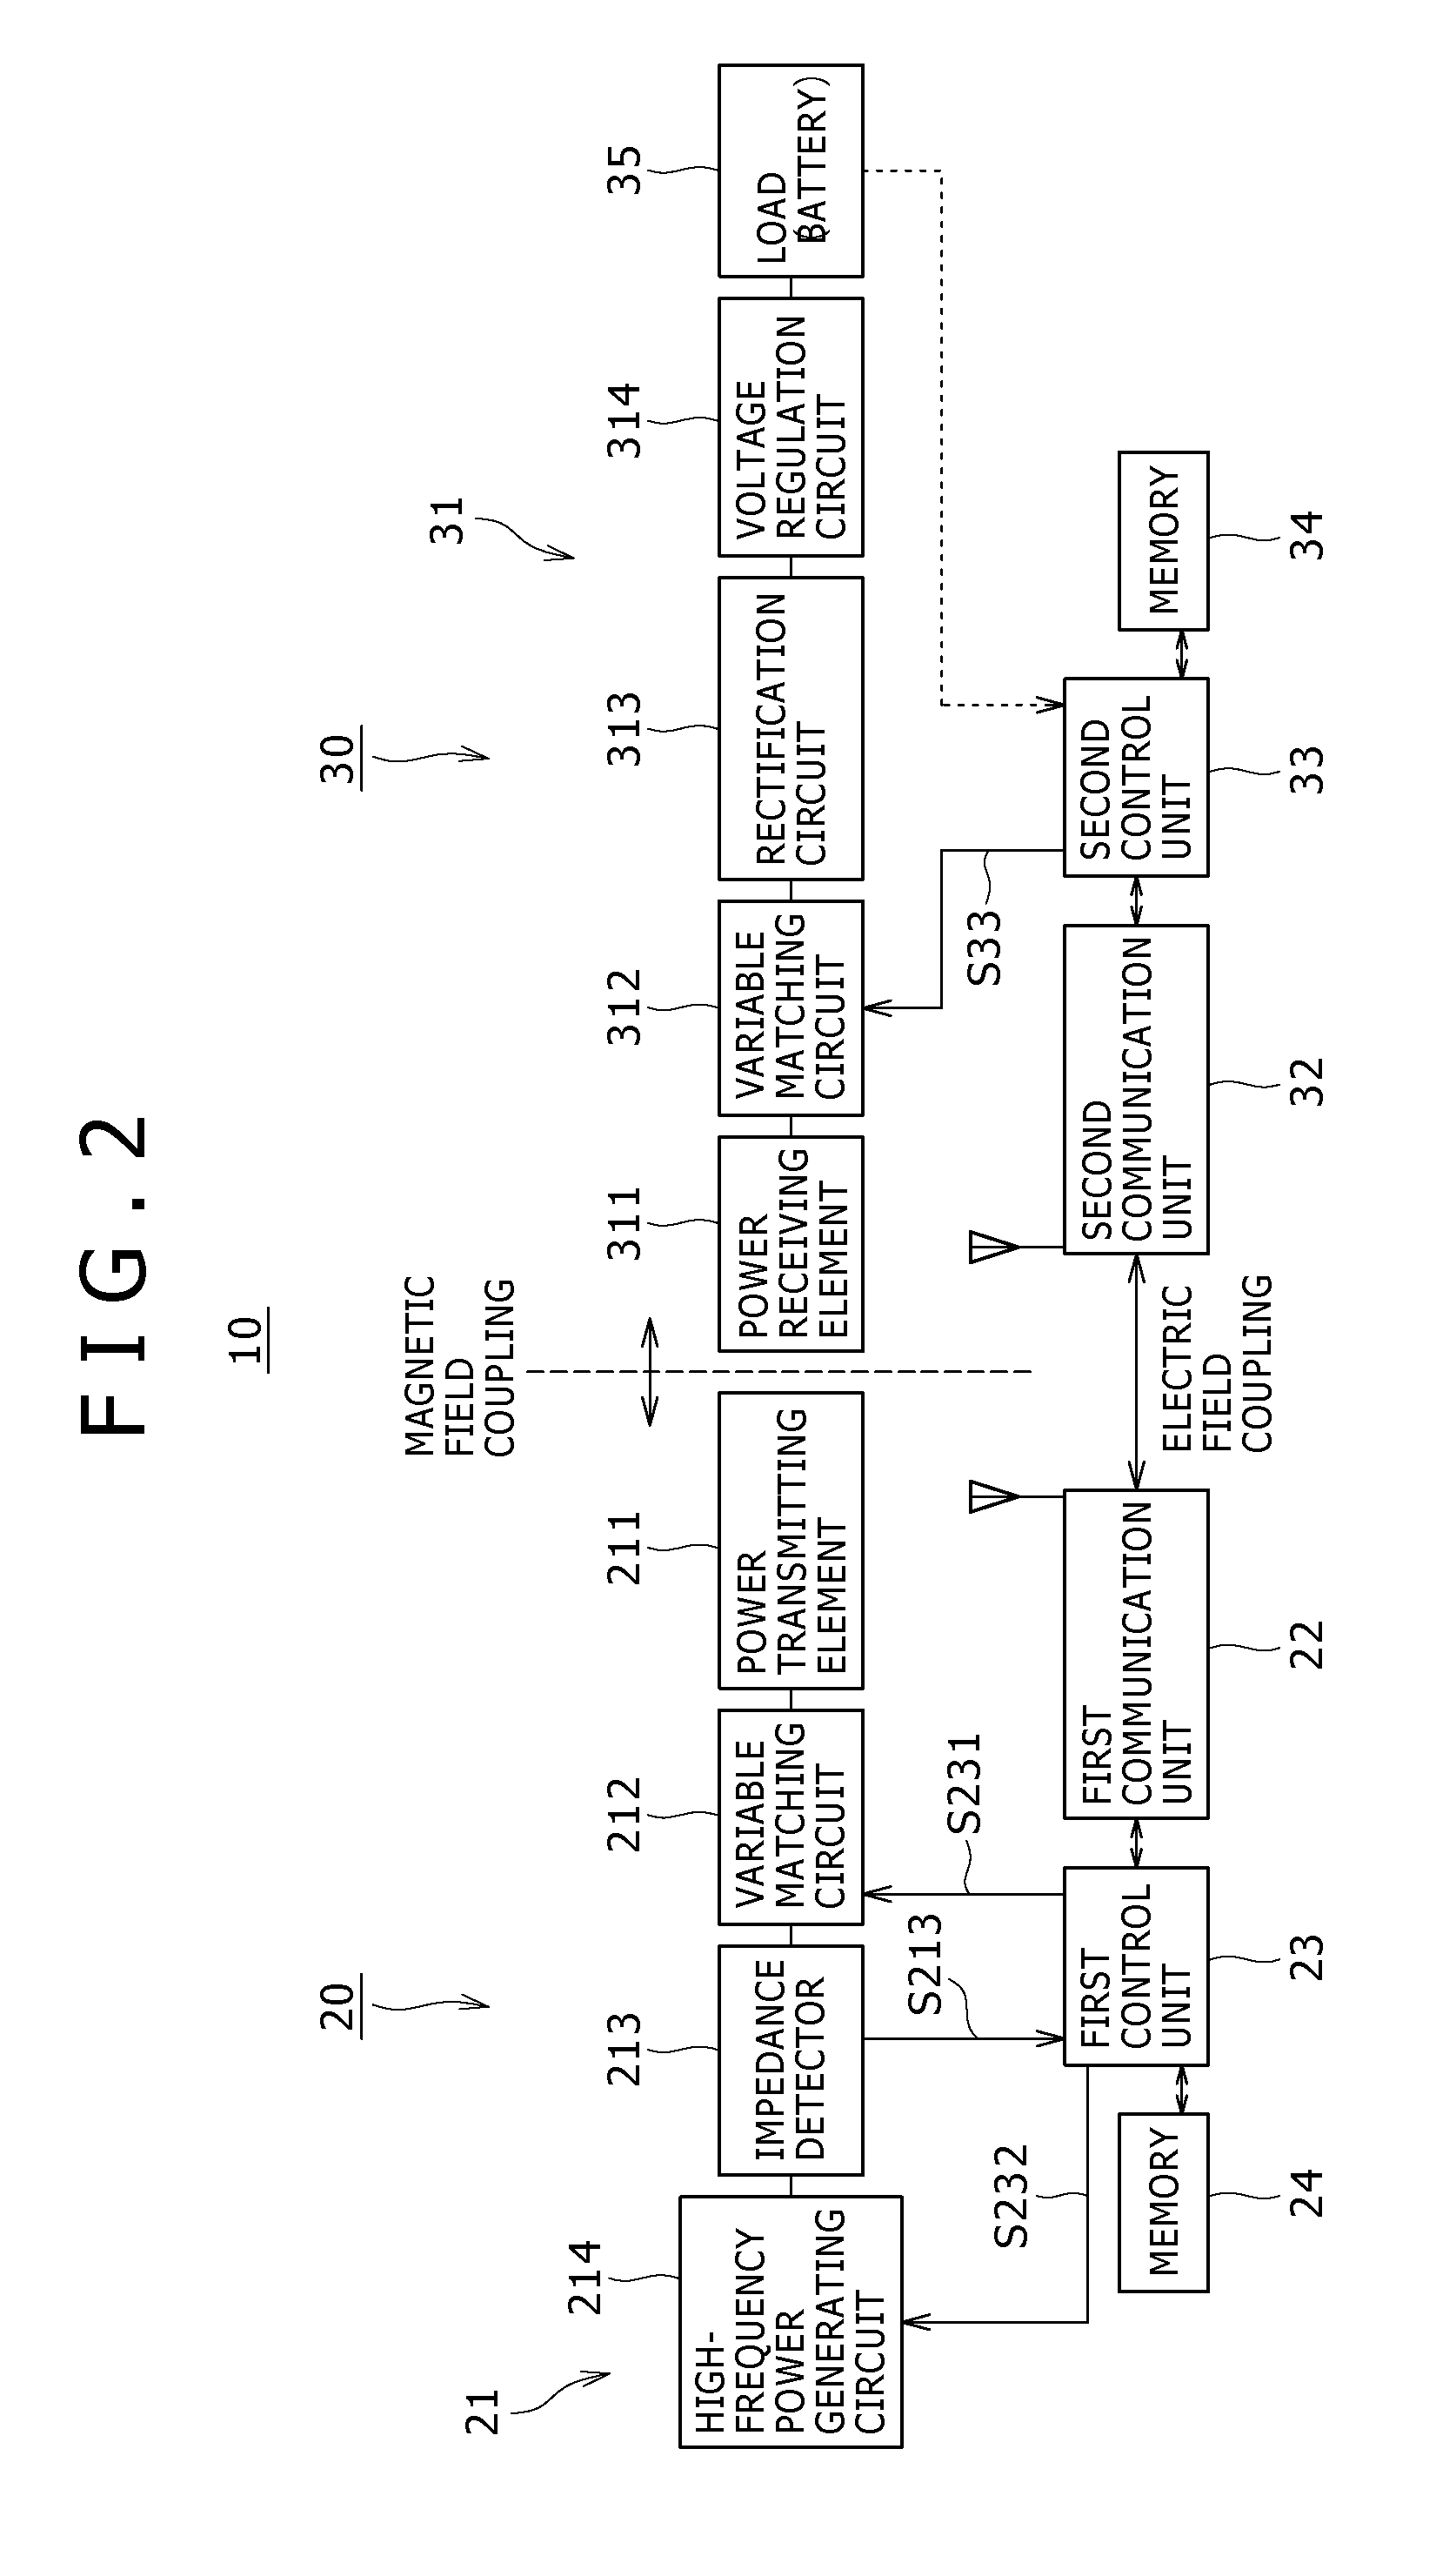 Non-contact charge and communication system